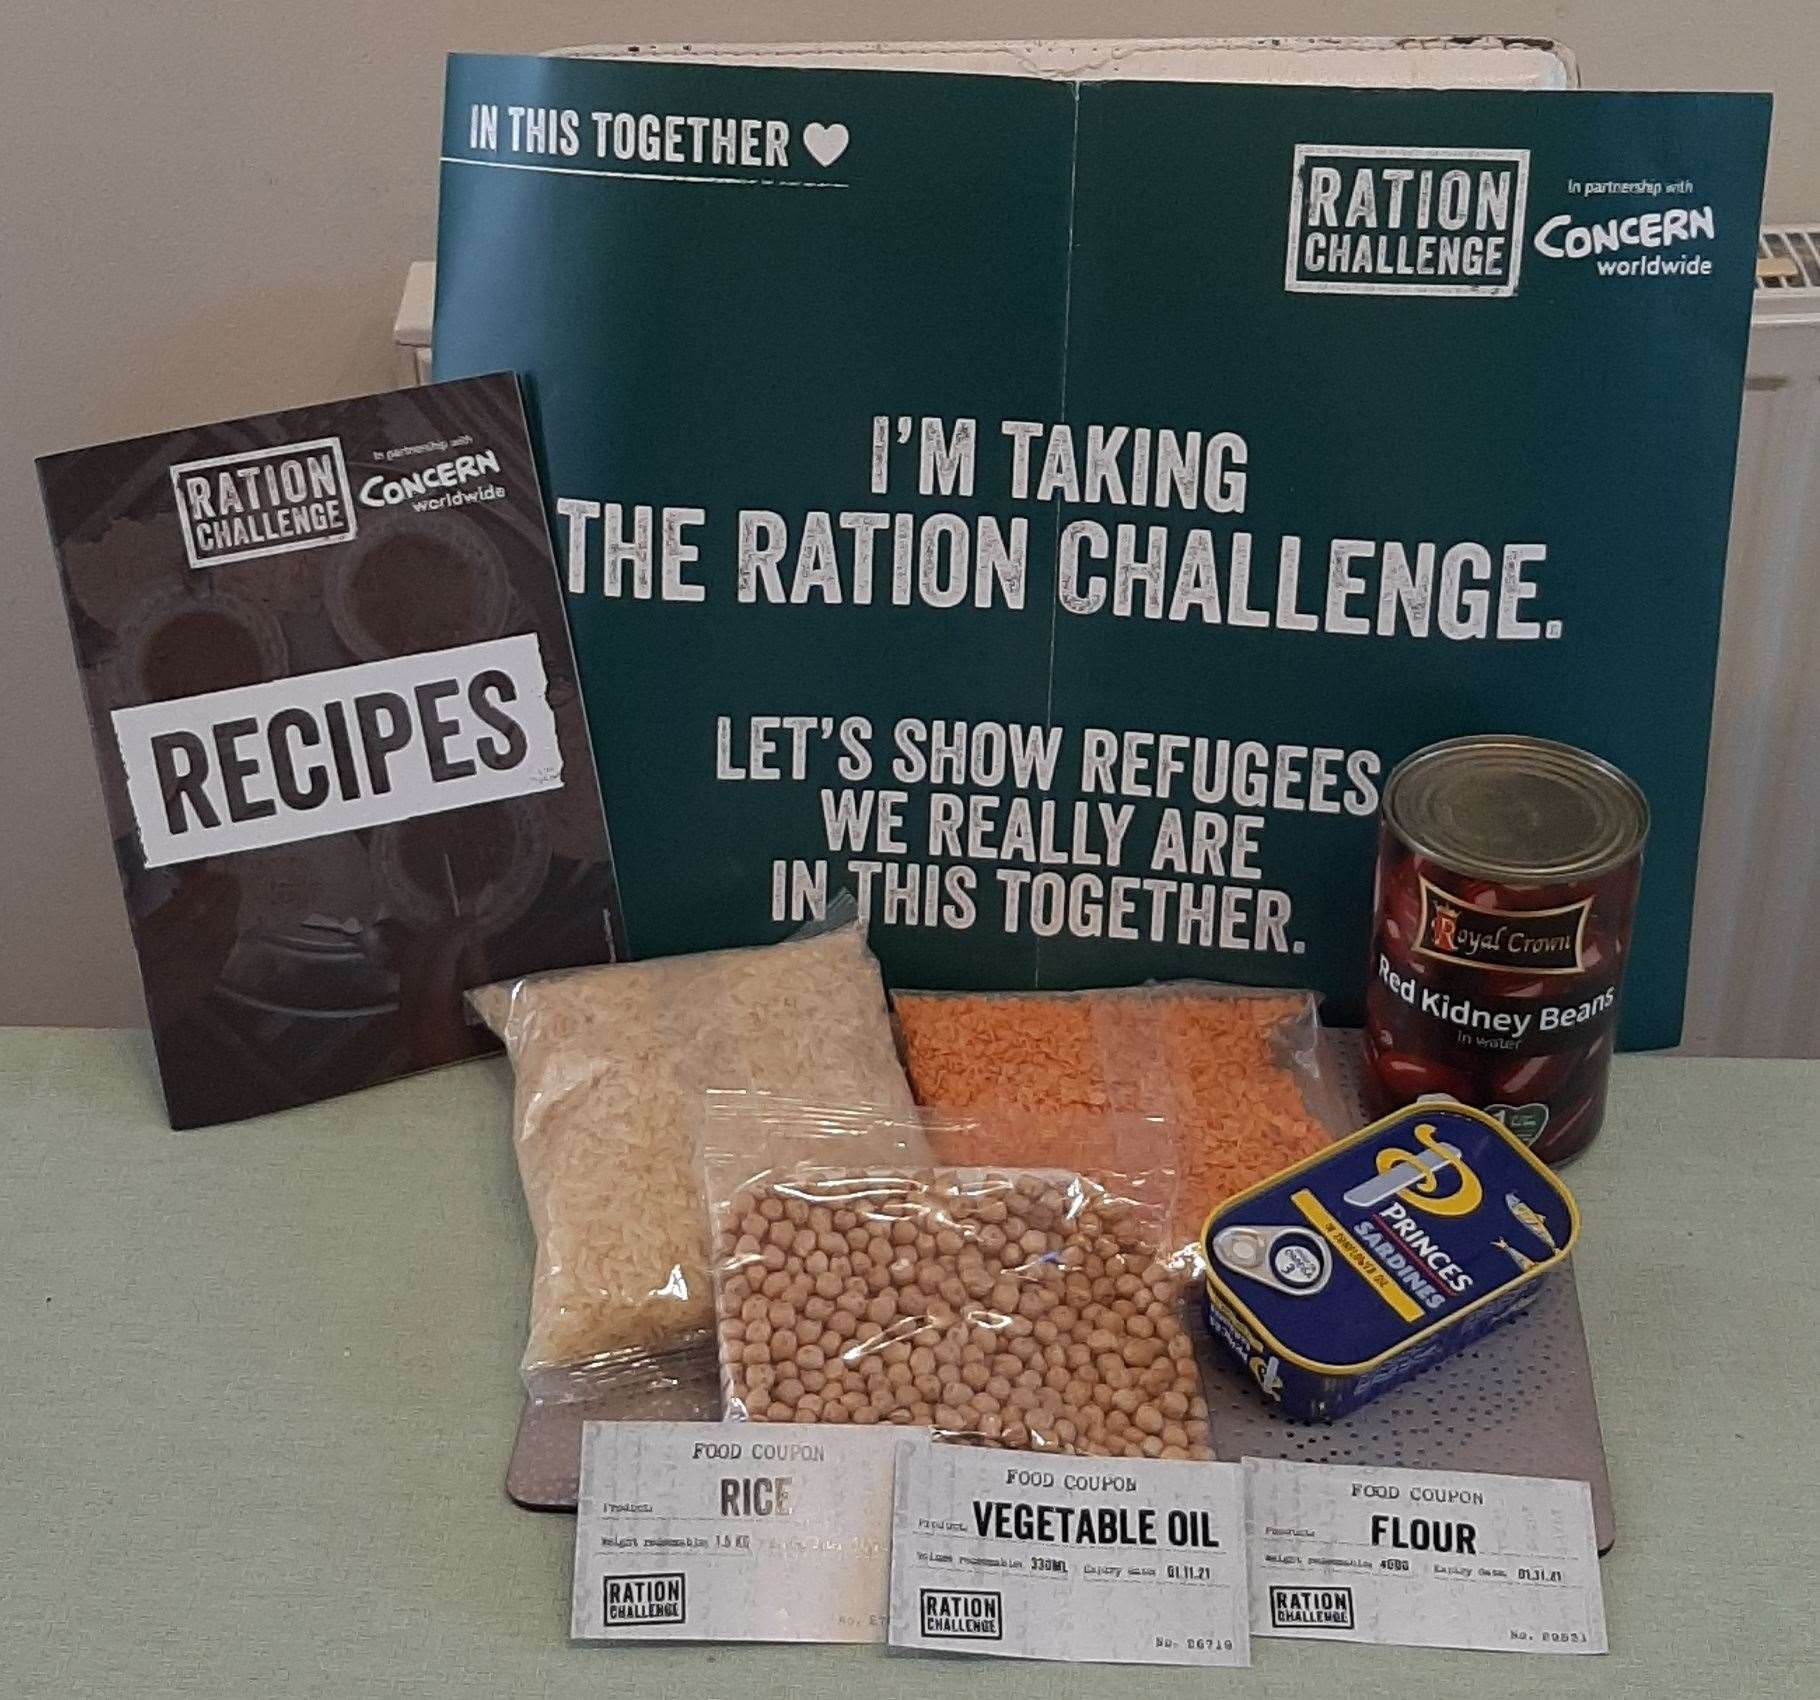 The Concern Worldwide ration challenge tool kit and ingredients